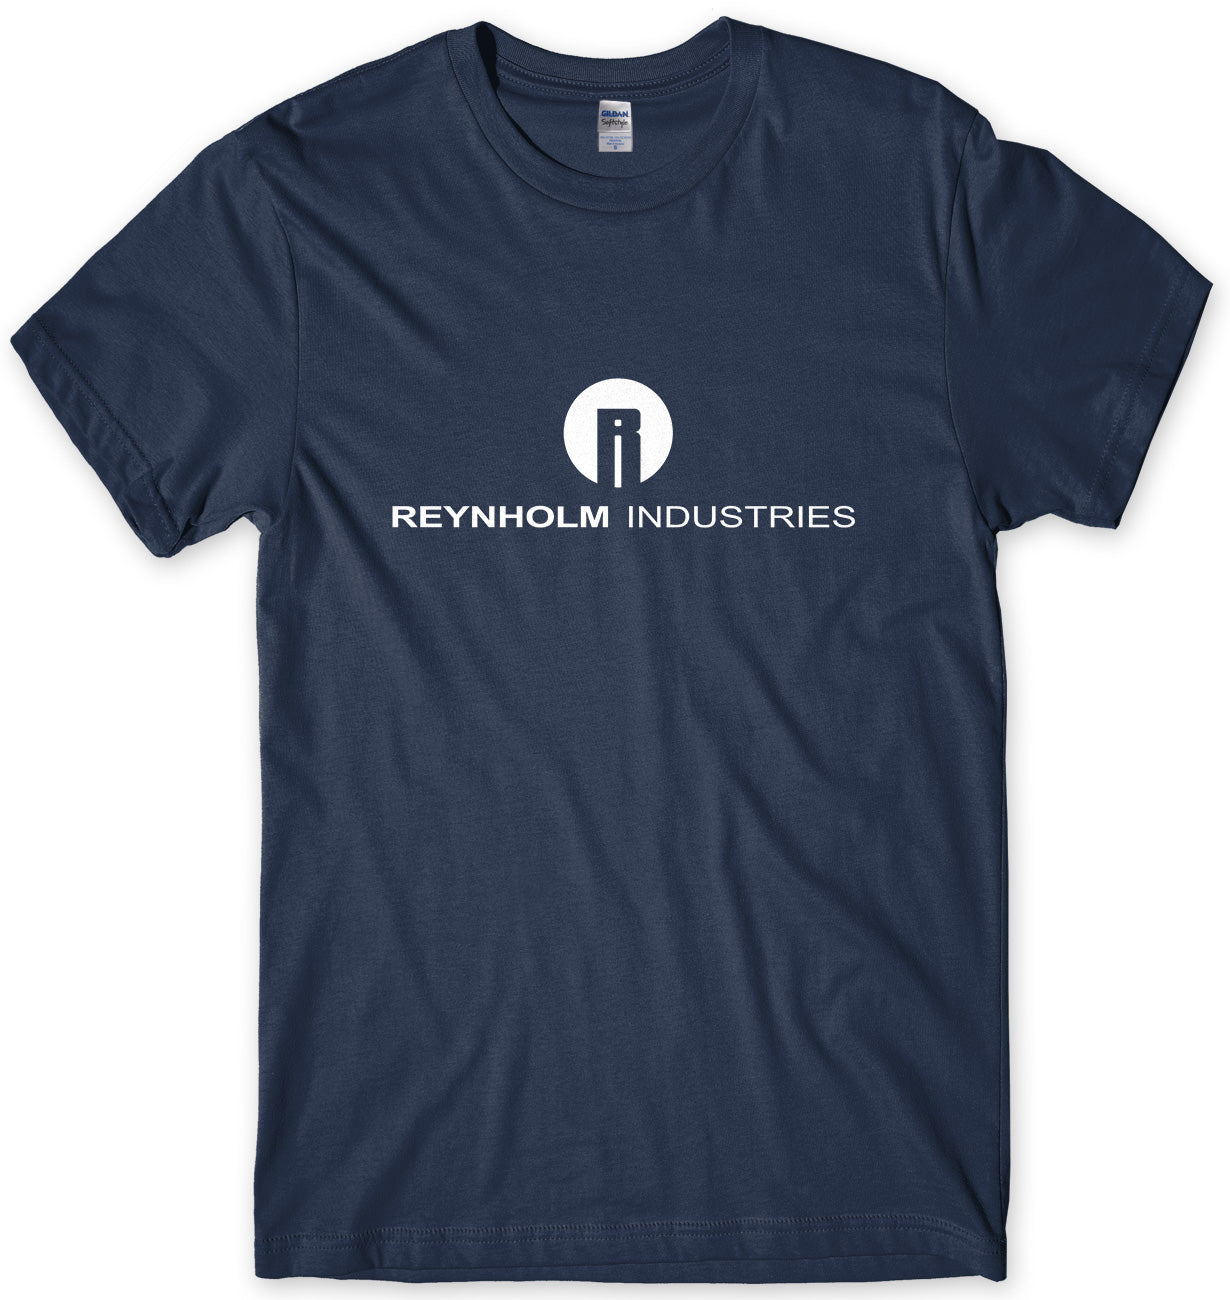 REYNHOLM INDUSTRIES - INSPIRED BY THE IT CROWD MENS UNISEX T-SHIRT